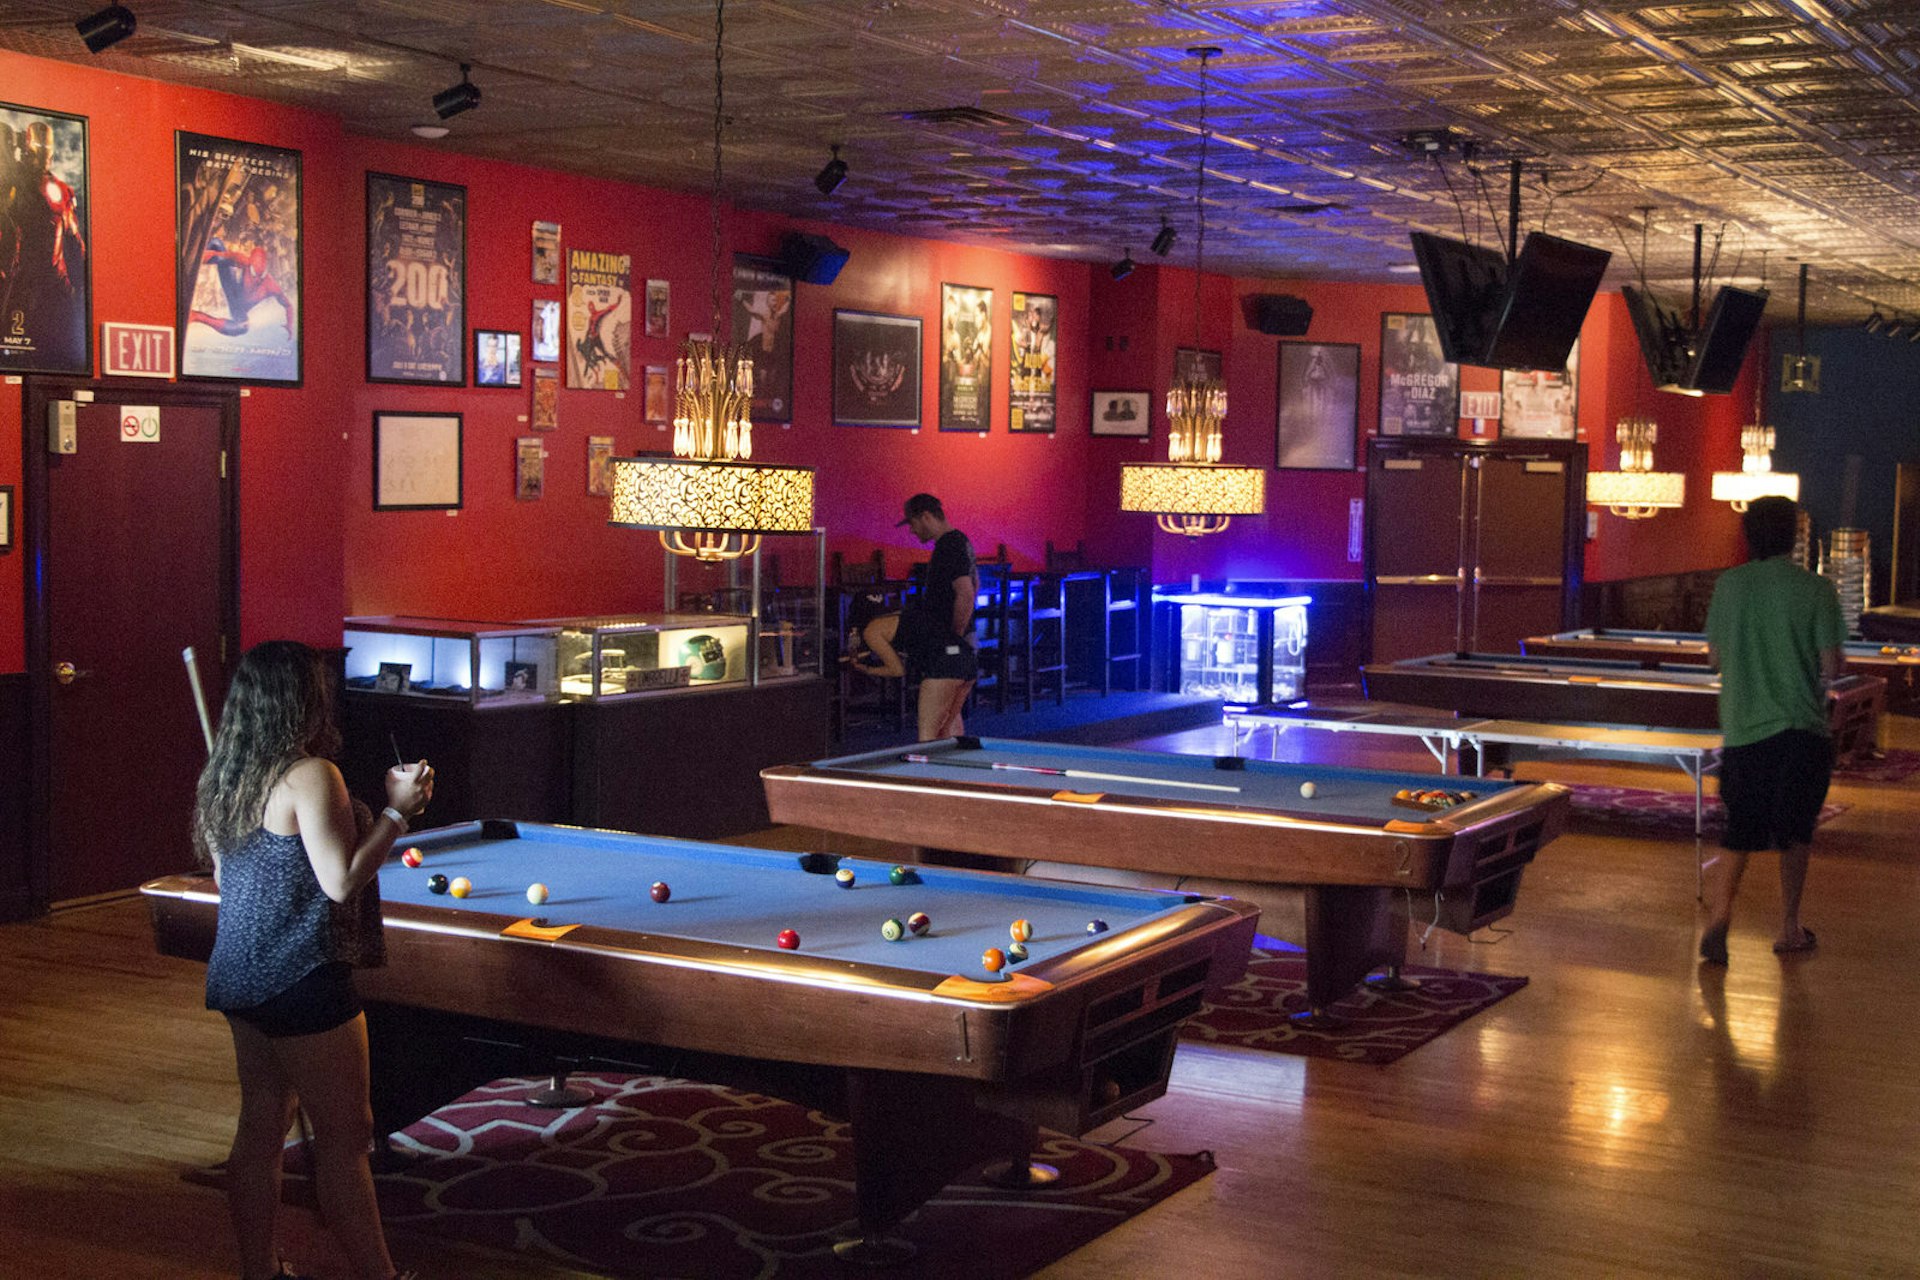 A row of pool tables is seen in a deep red room with movie posters all over the walls. © Greg Thilmont / Lonely Planet